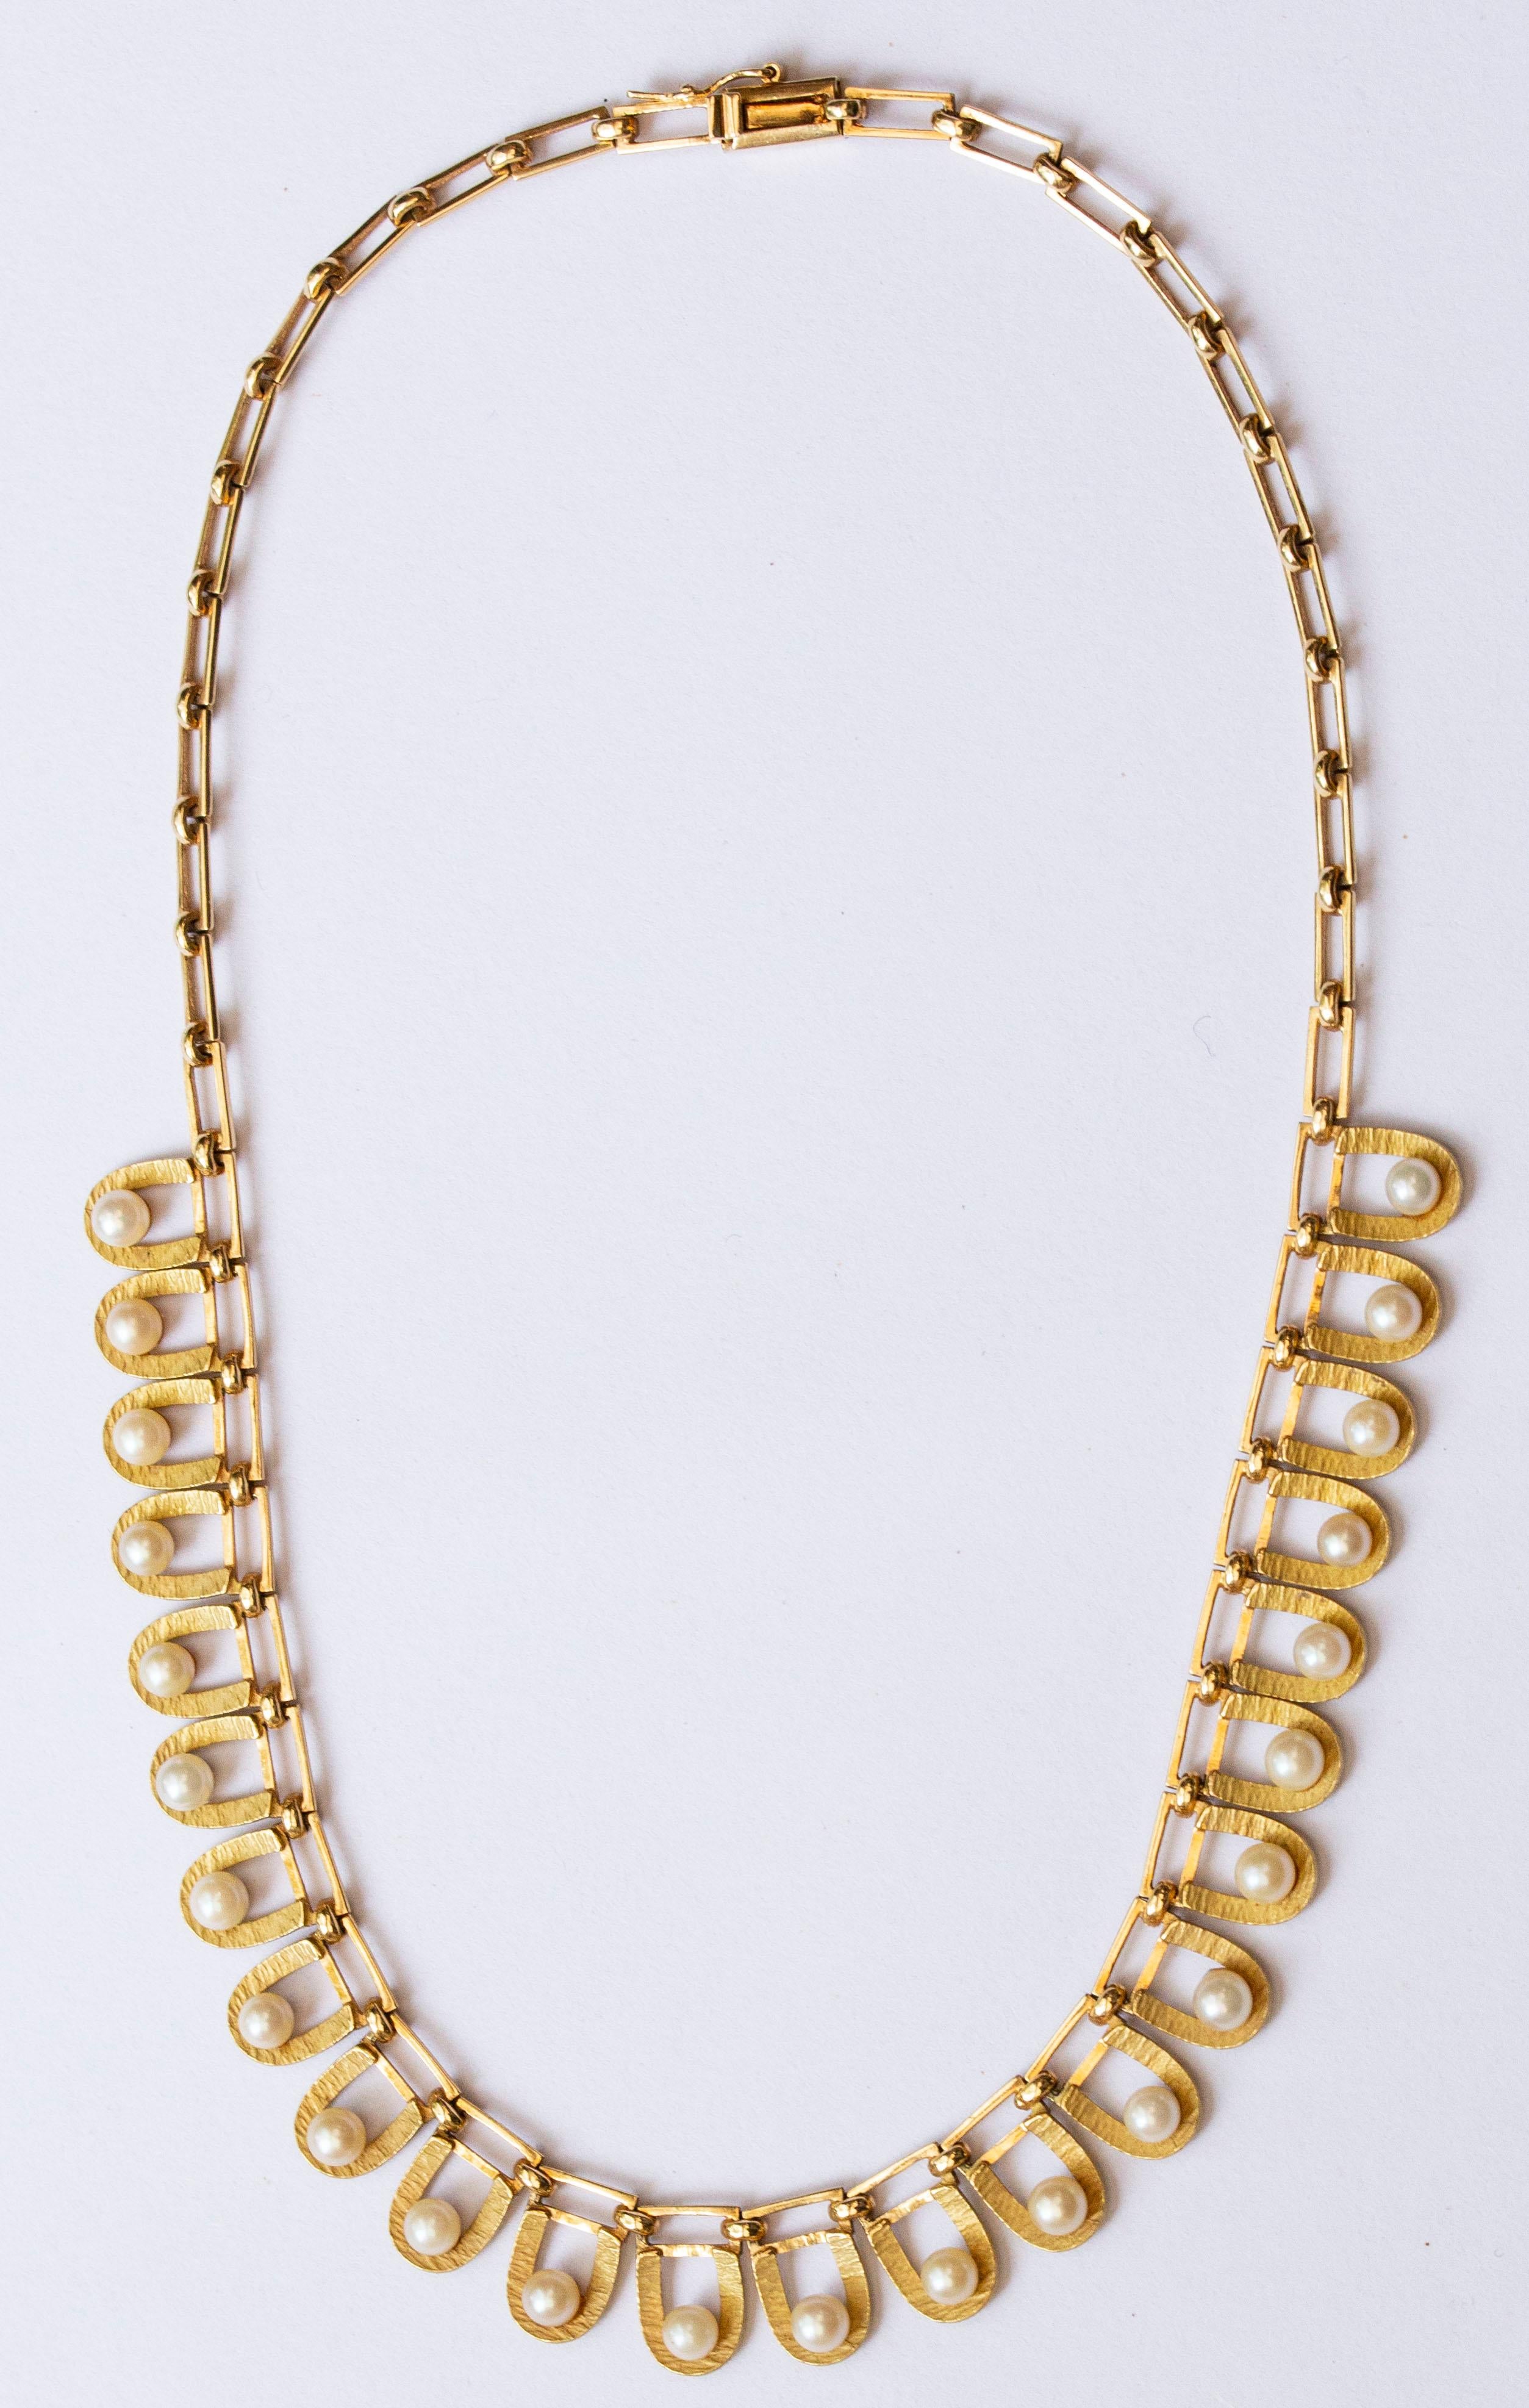 Round Cut 14 Karat Yellow Gold Choker Link Necklace with Cultivated Akoya Pearls 